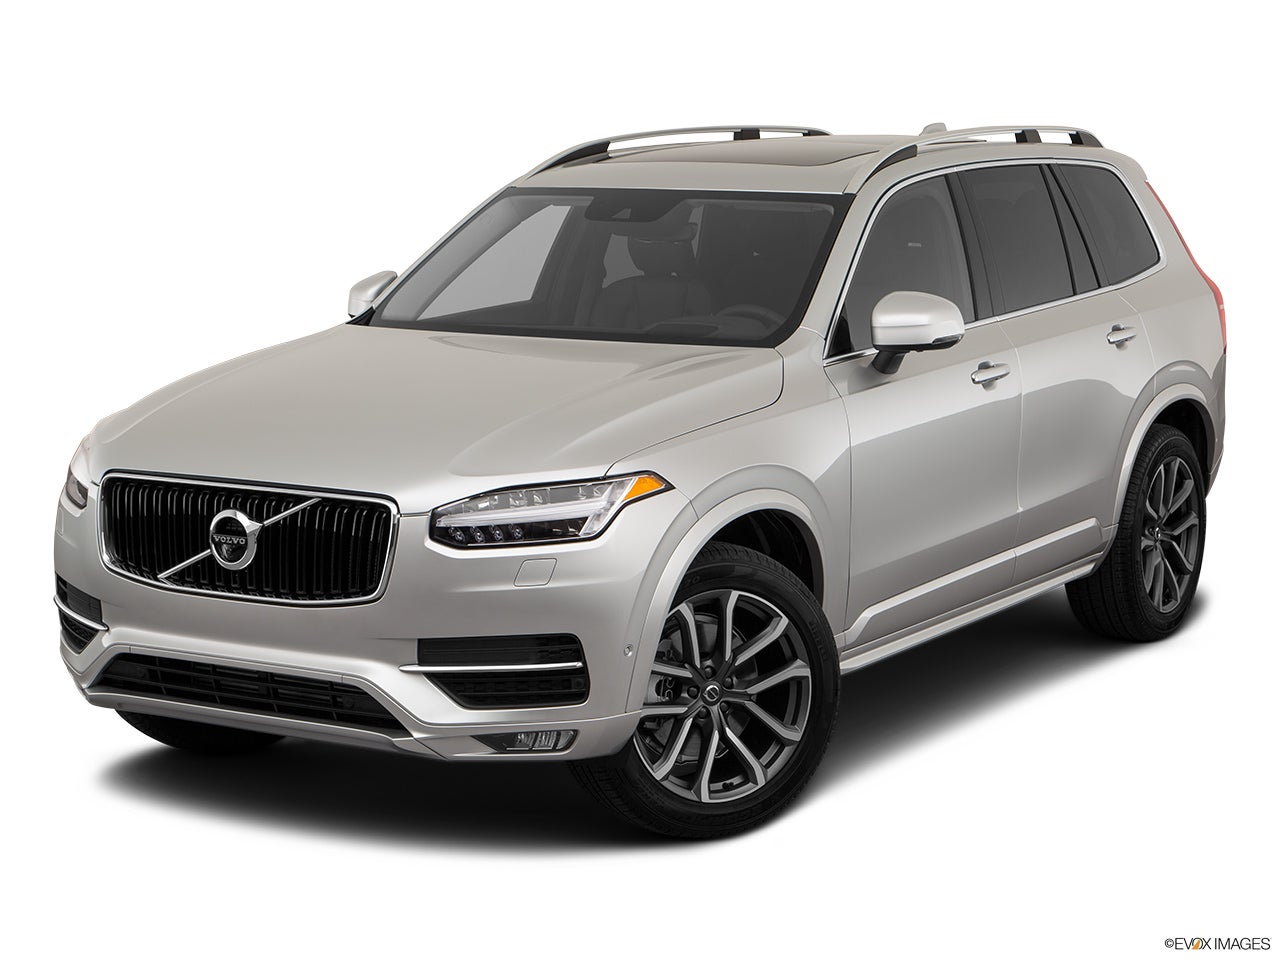 https://www.chargepoint.com/sites/default/files/2019-01/volvo%20xc90_0.jpg